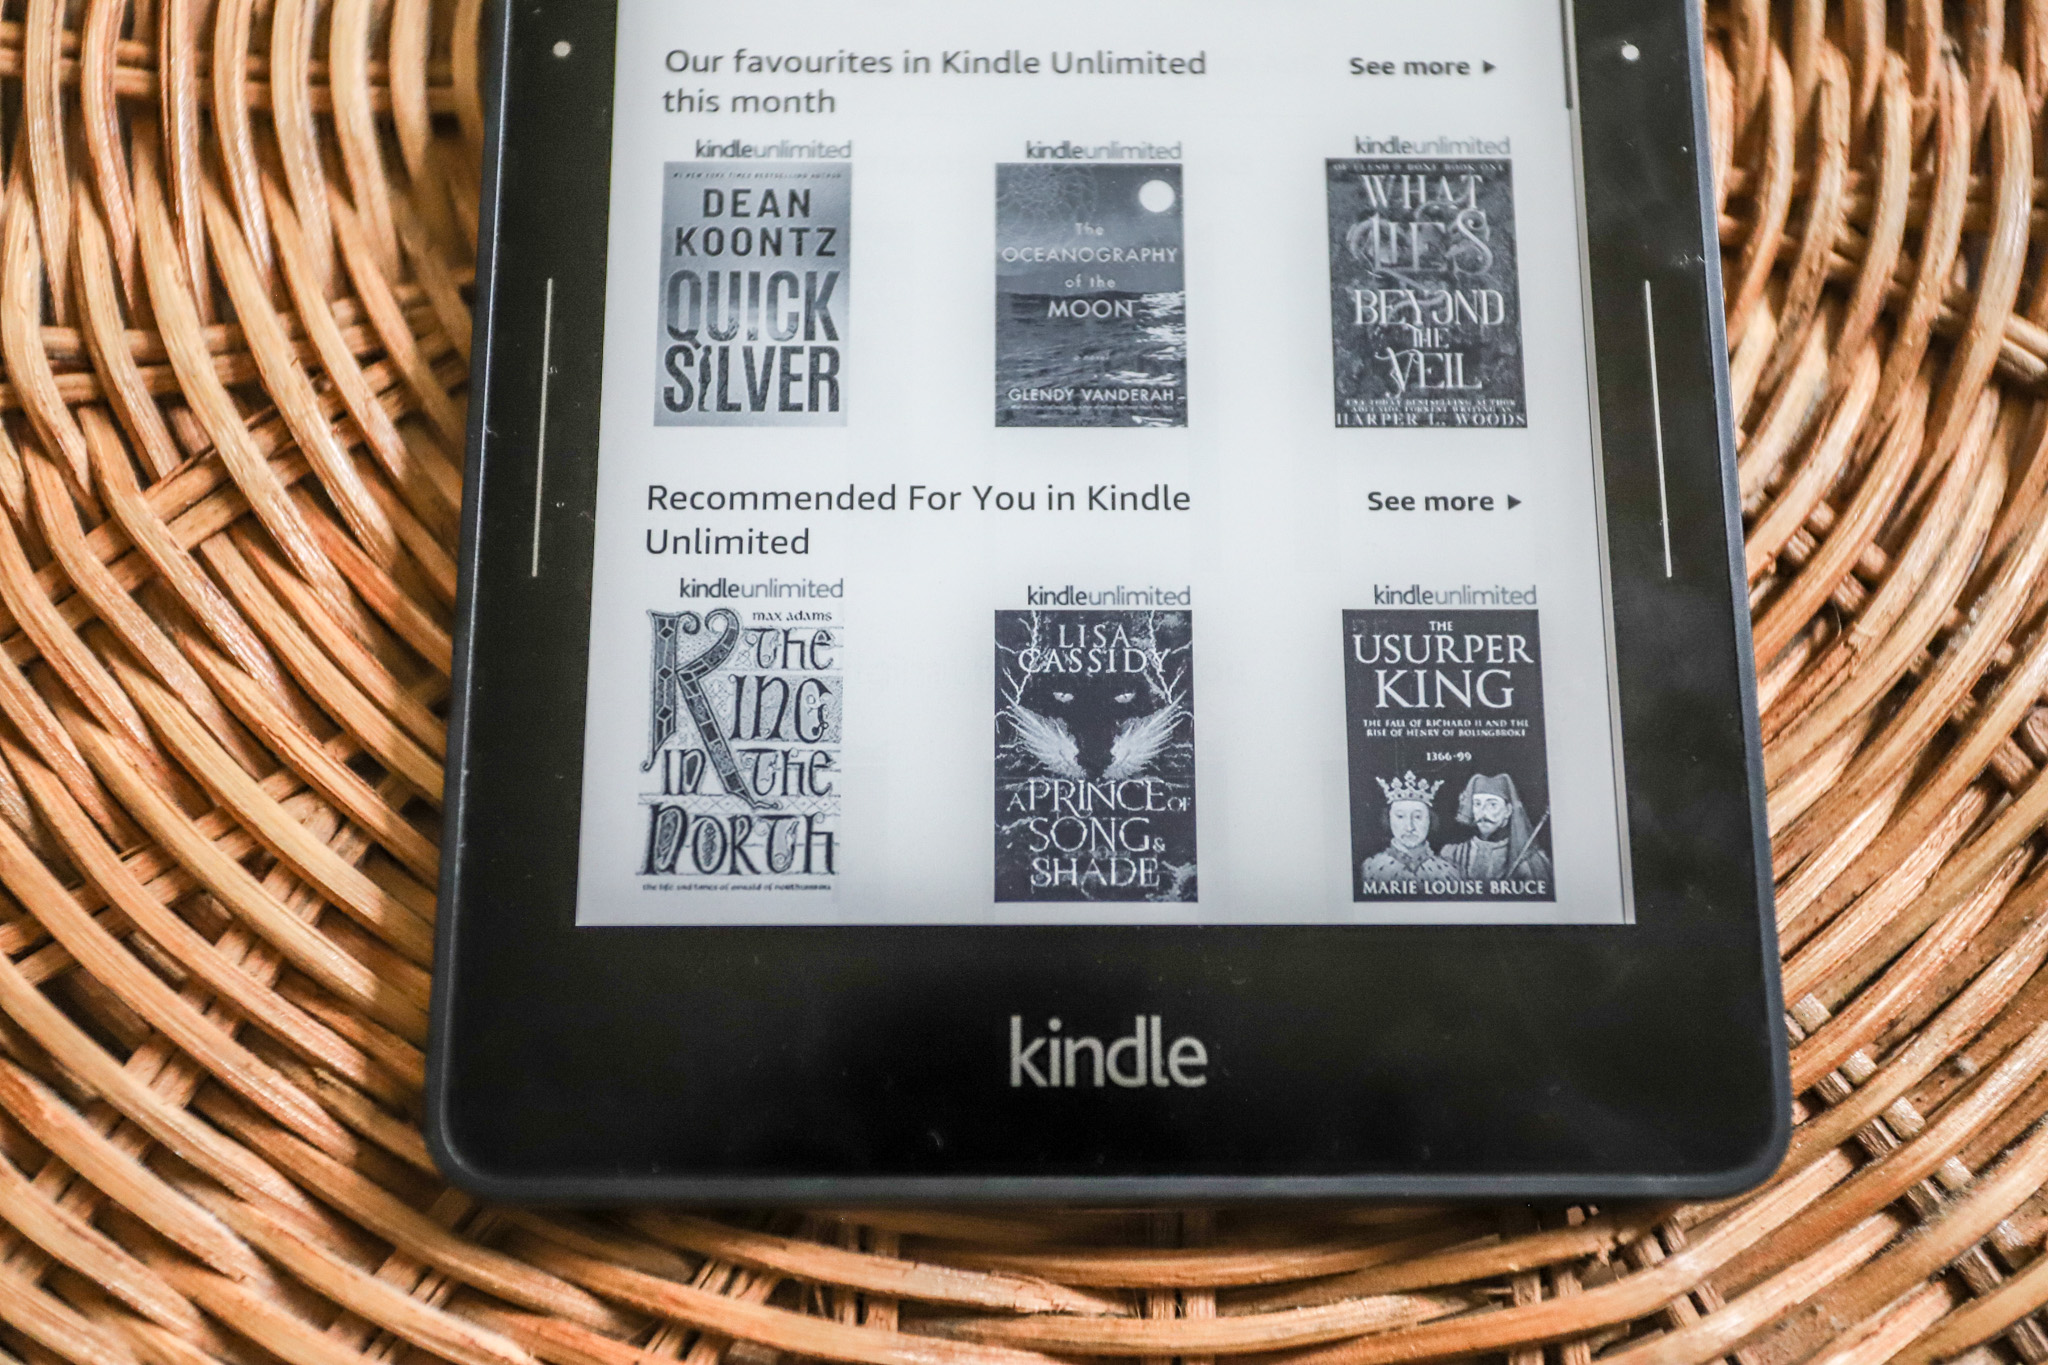 Browsing the Kindle Unlimited catalogue on a Kindle Voyage